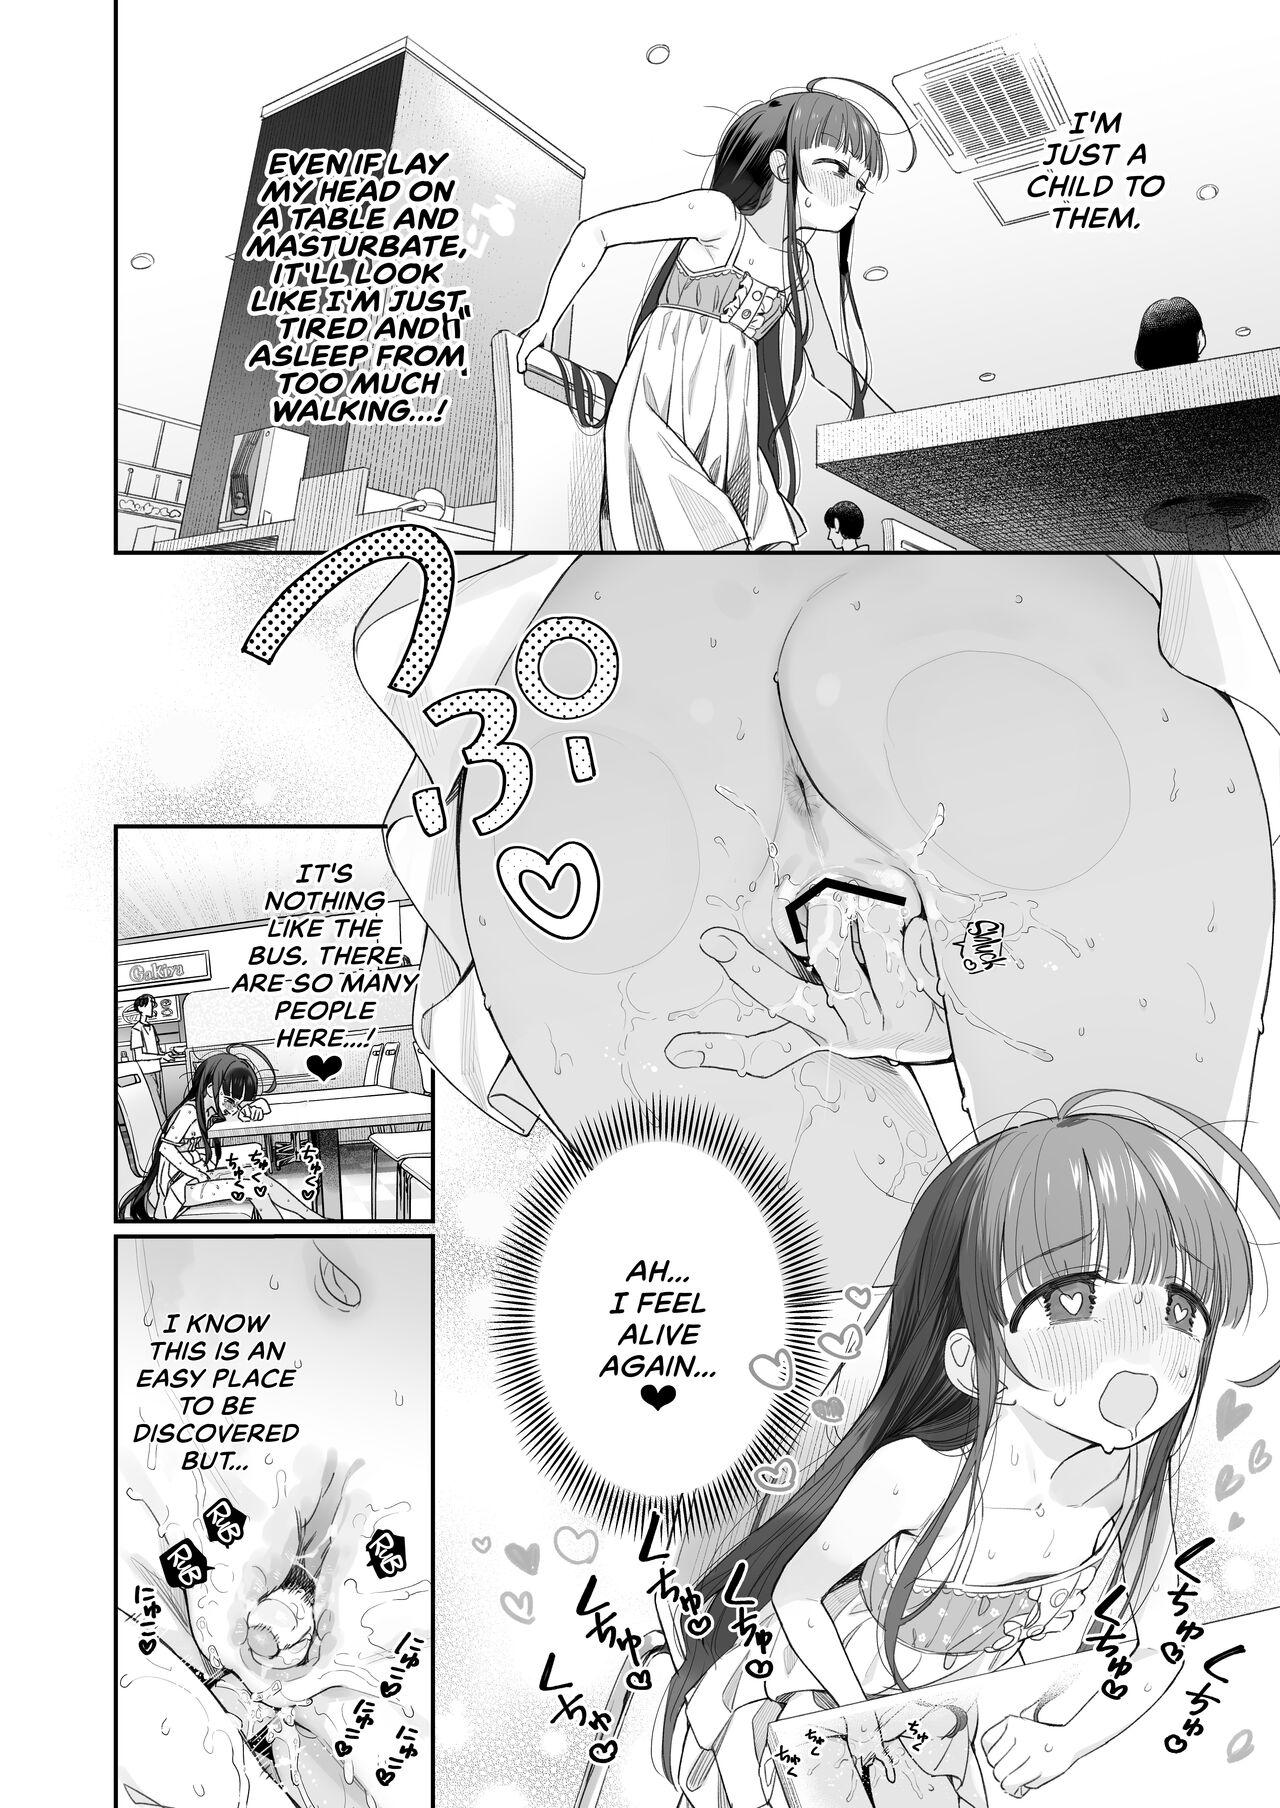 [Asunaro Neat. (Ronna)] TS Loli Oji-san no Bouken Onanie Hen | The Adventures of an Old Man Who Was Gender-Swapped Into a Loli ~Masturbation Chapter~ [English] [CulturedCommissions] [Digital] 30